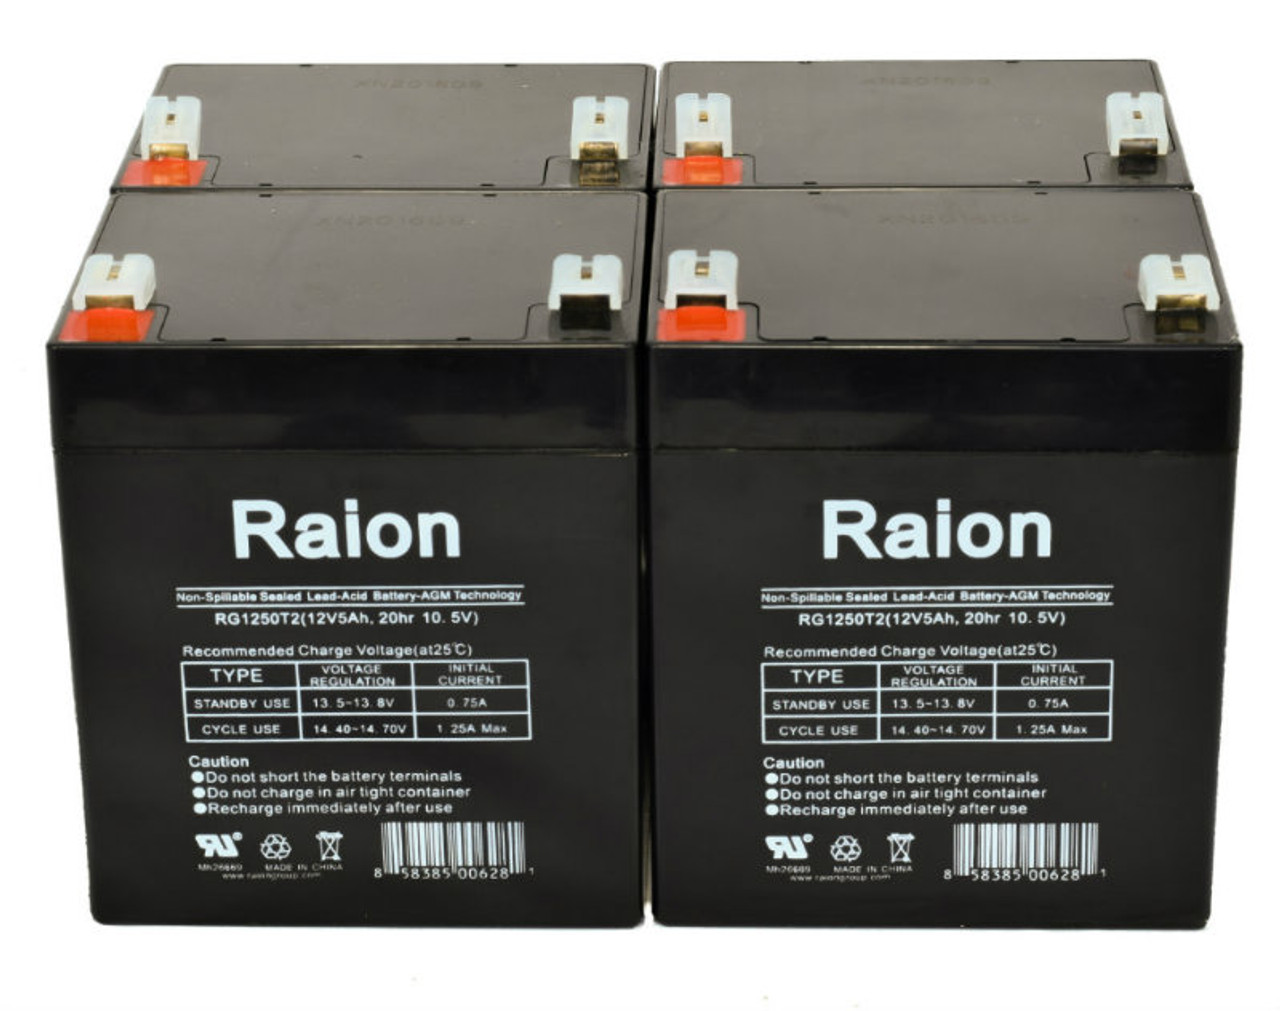 Raion Power 12V 5Ah RG1250T2 Replacement Lead Acid Battery for Fengri 6-FM-4.0 - 4 Pack